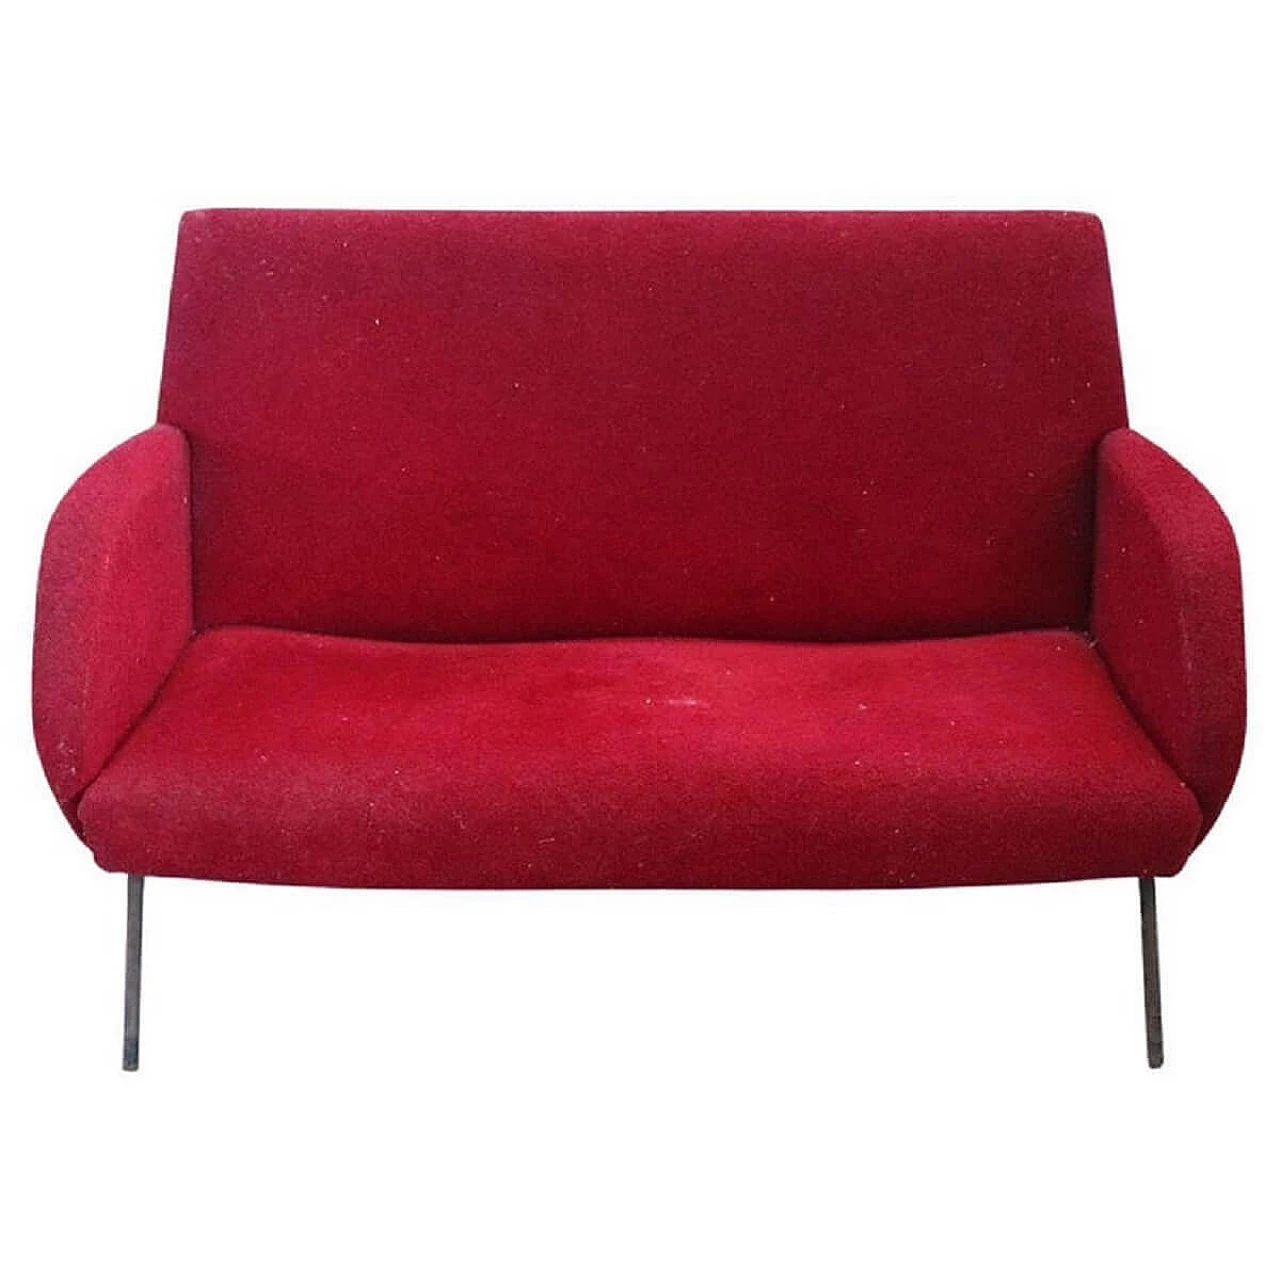 Metal frame sofa with terry cloth upholstery and red bouclé wool cover, 1950s 1